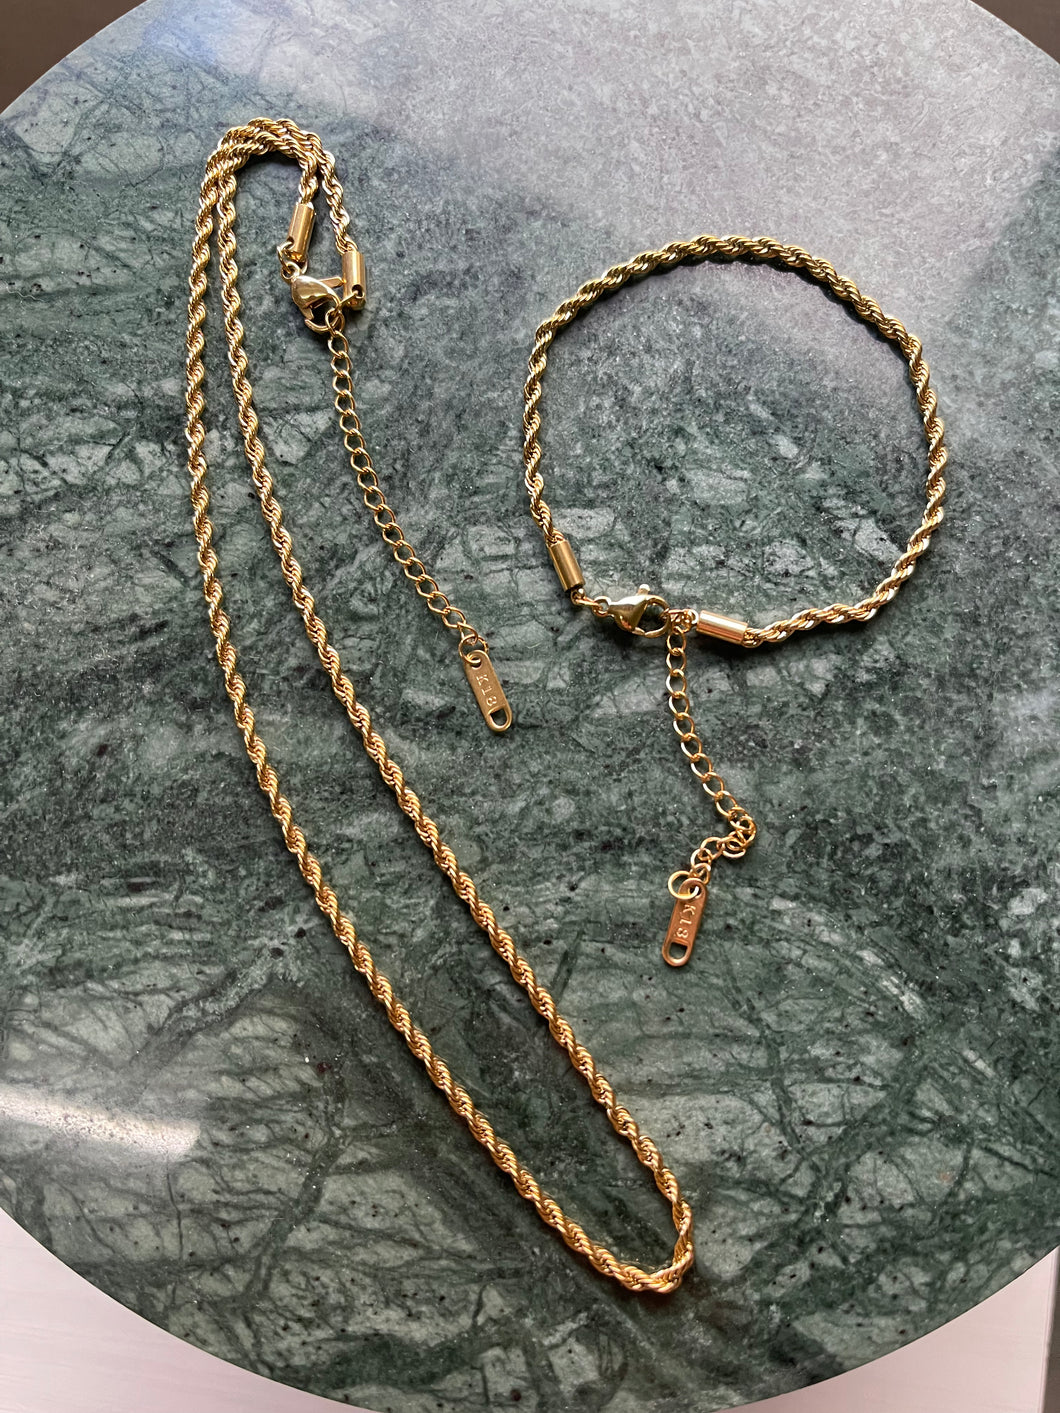 New~ Hera Rope Chain Necklace and Bracelet